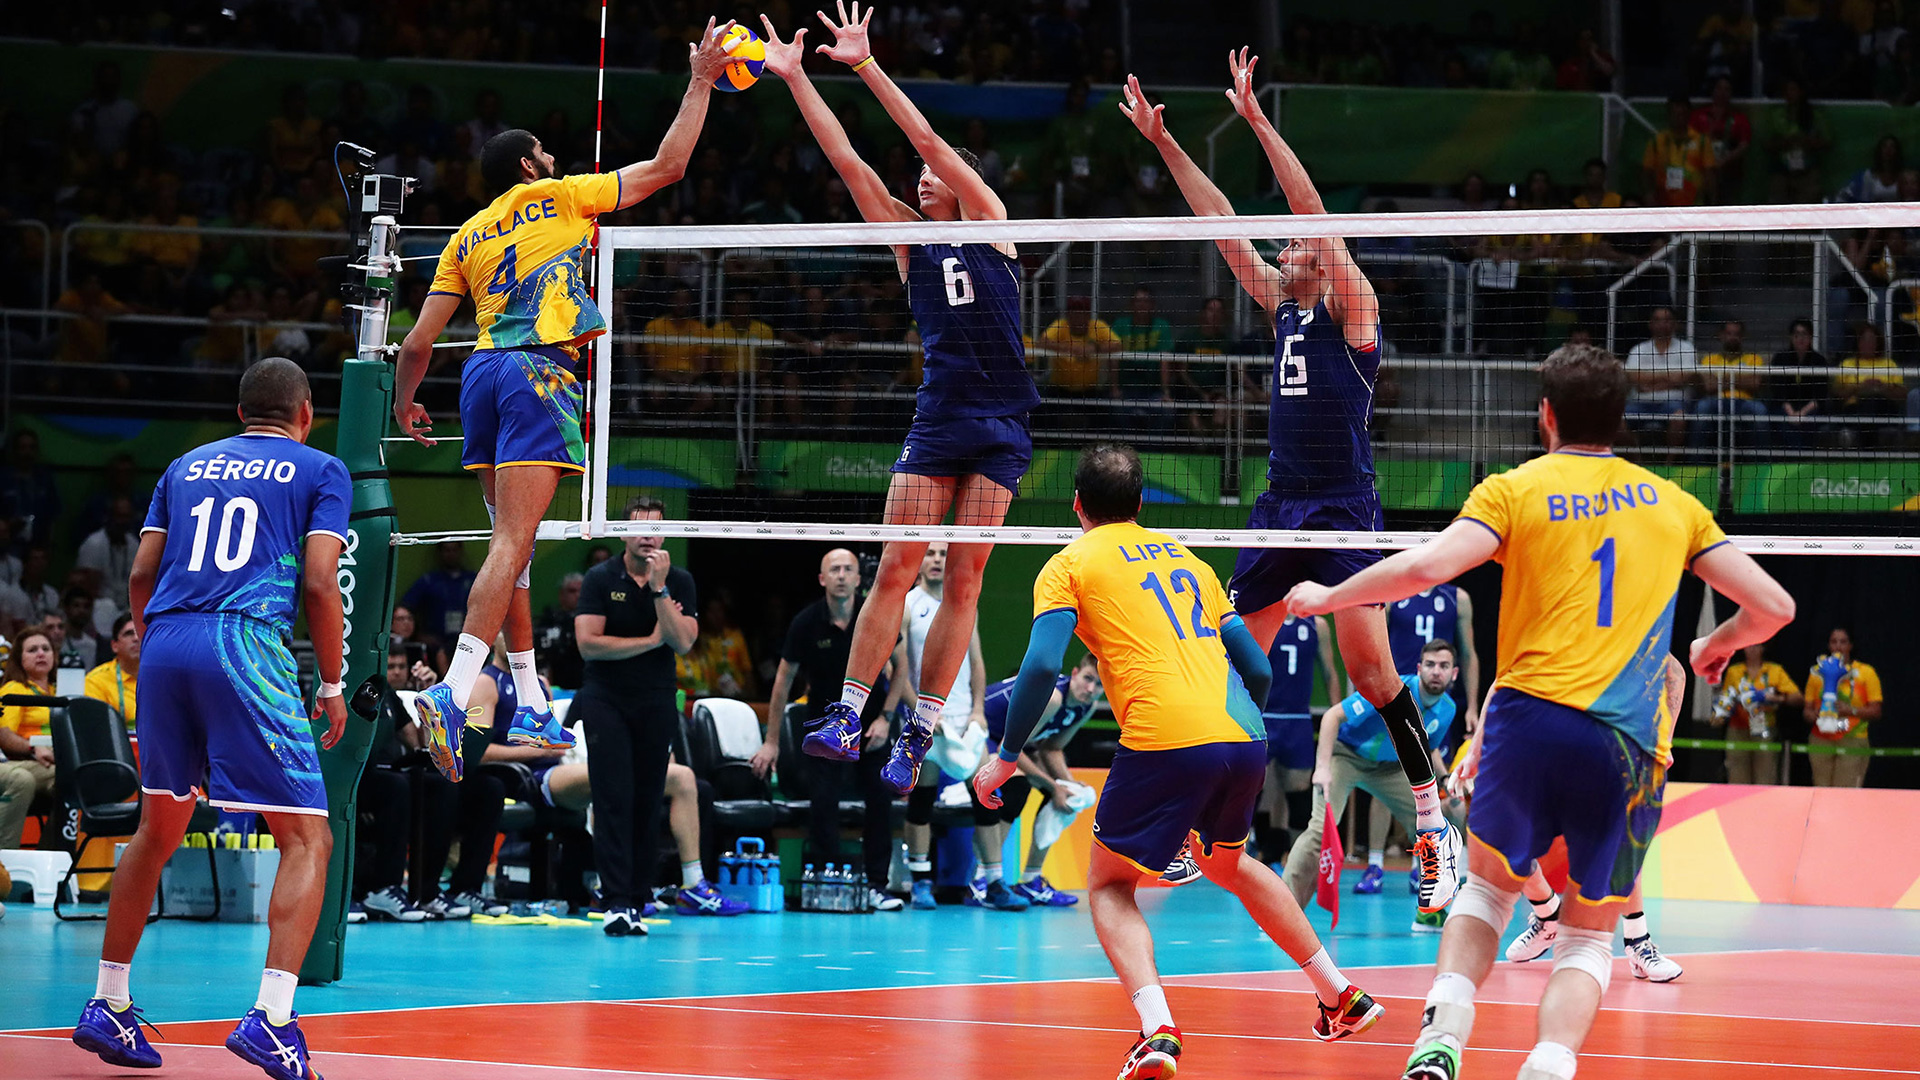 Undertrykke Borger helt bestemt Best Volleyball Teams to Consider for the 2020 Summer Olympics |  VolleyCountry